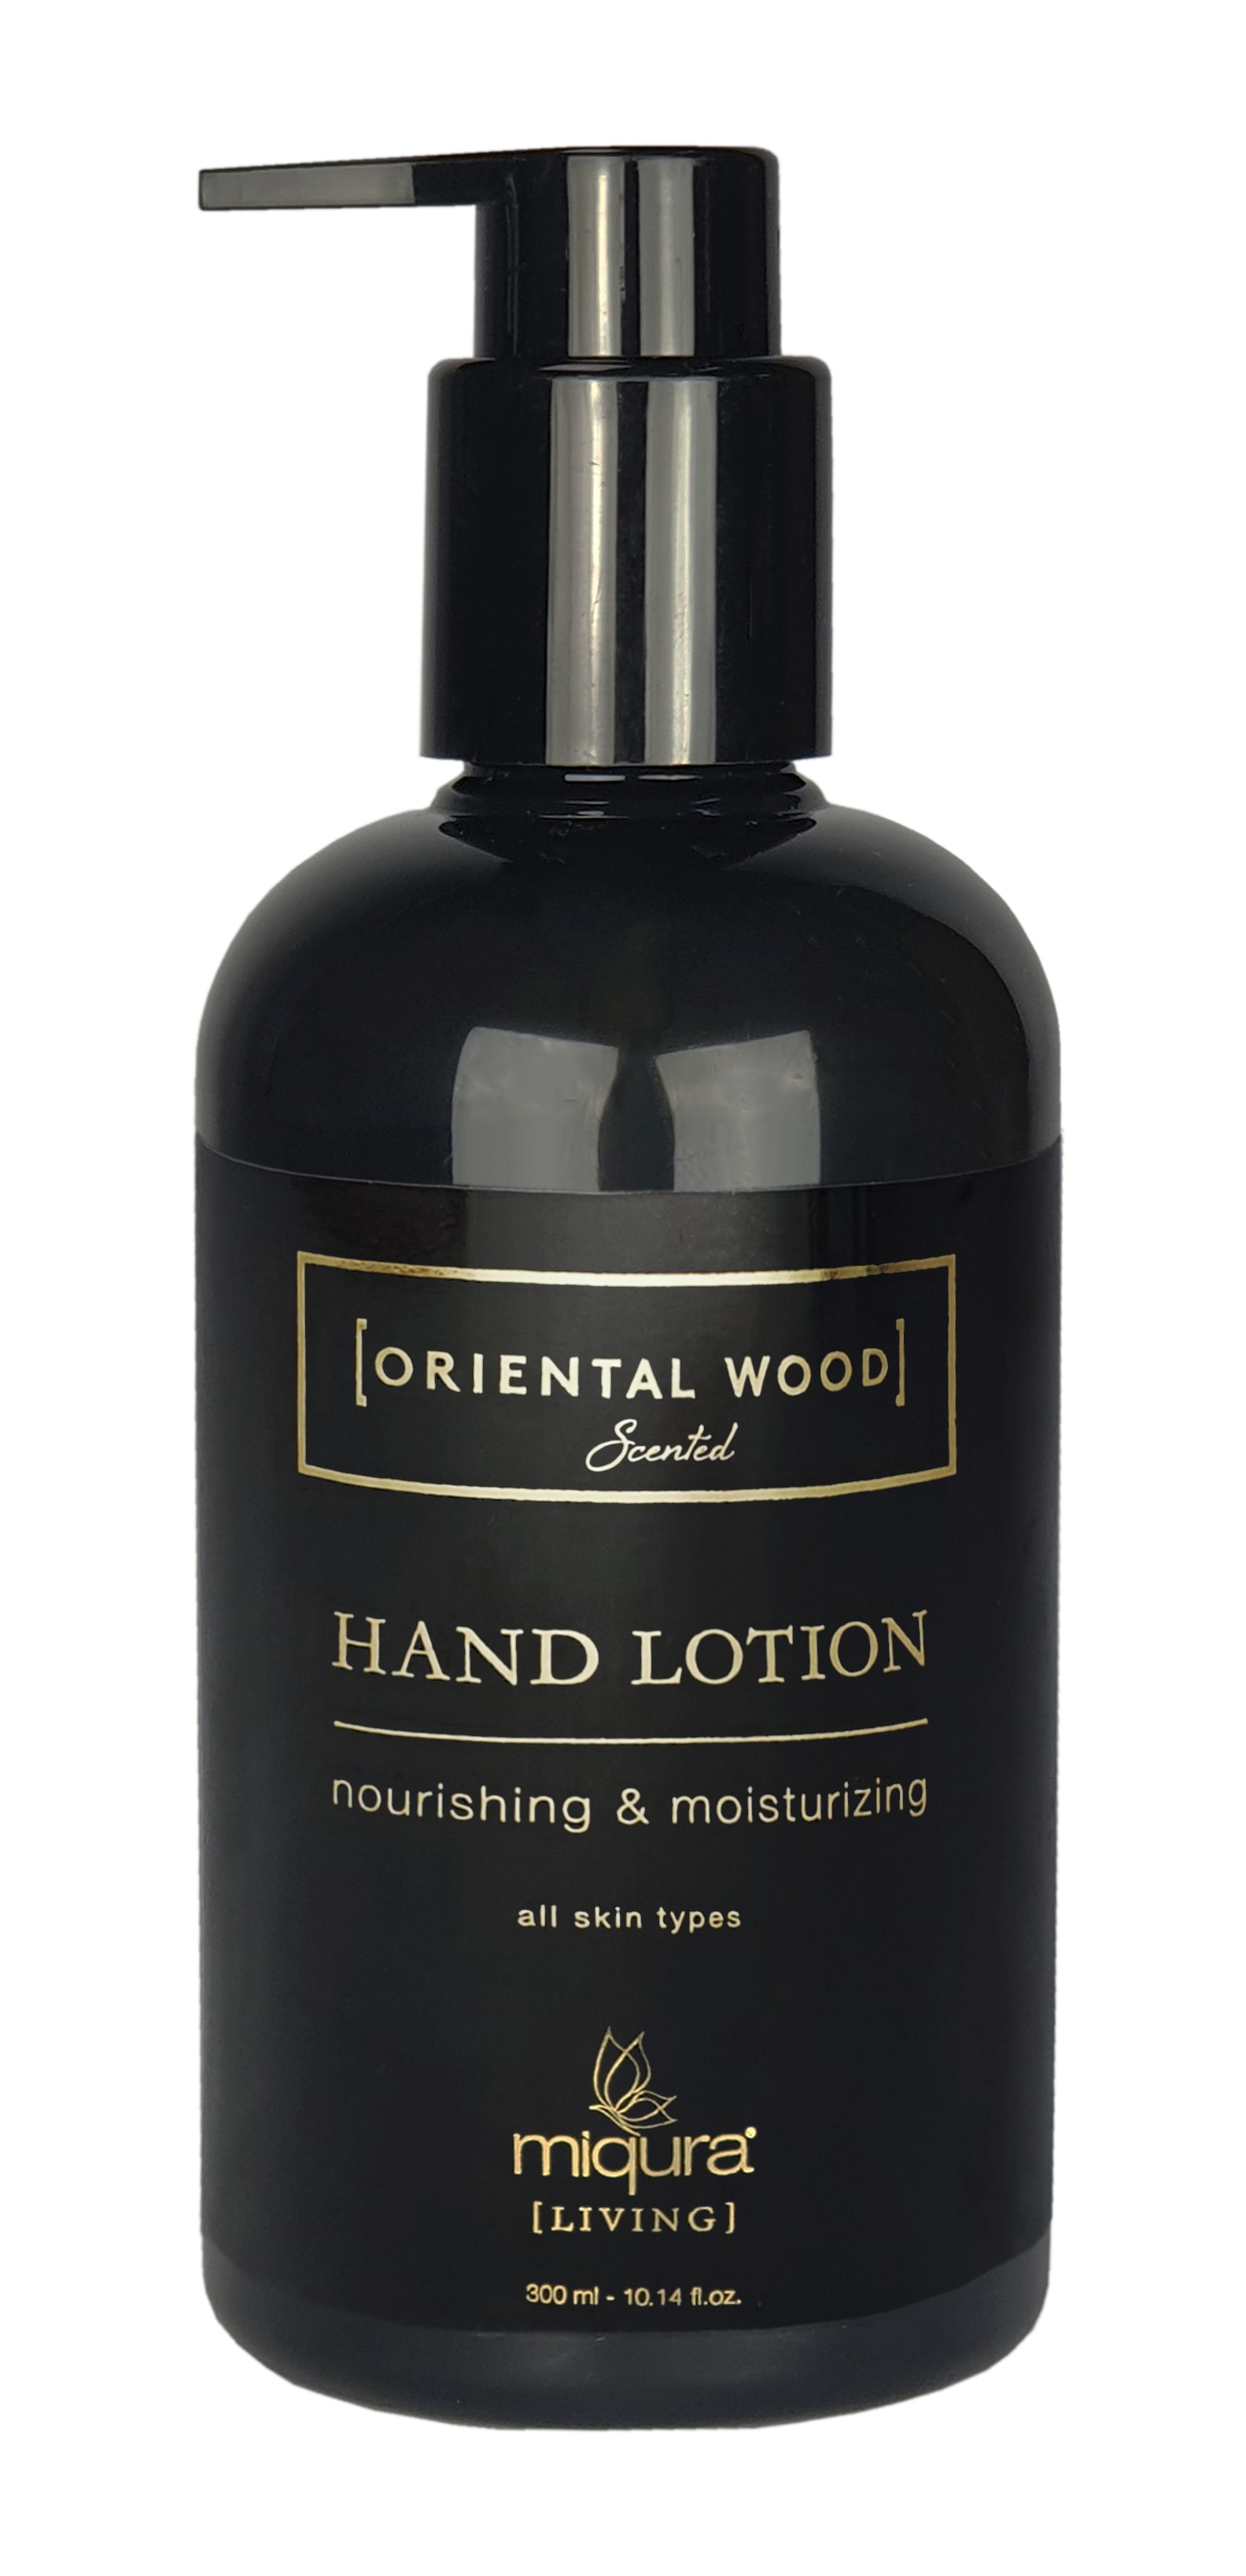  Living Oriental Wood Hand Lotion